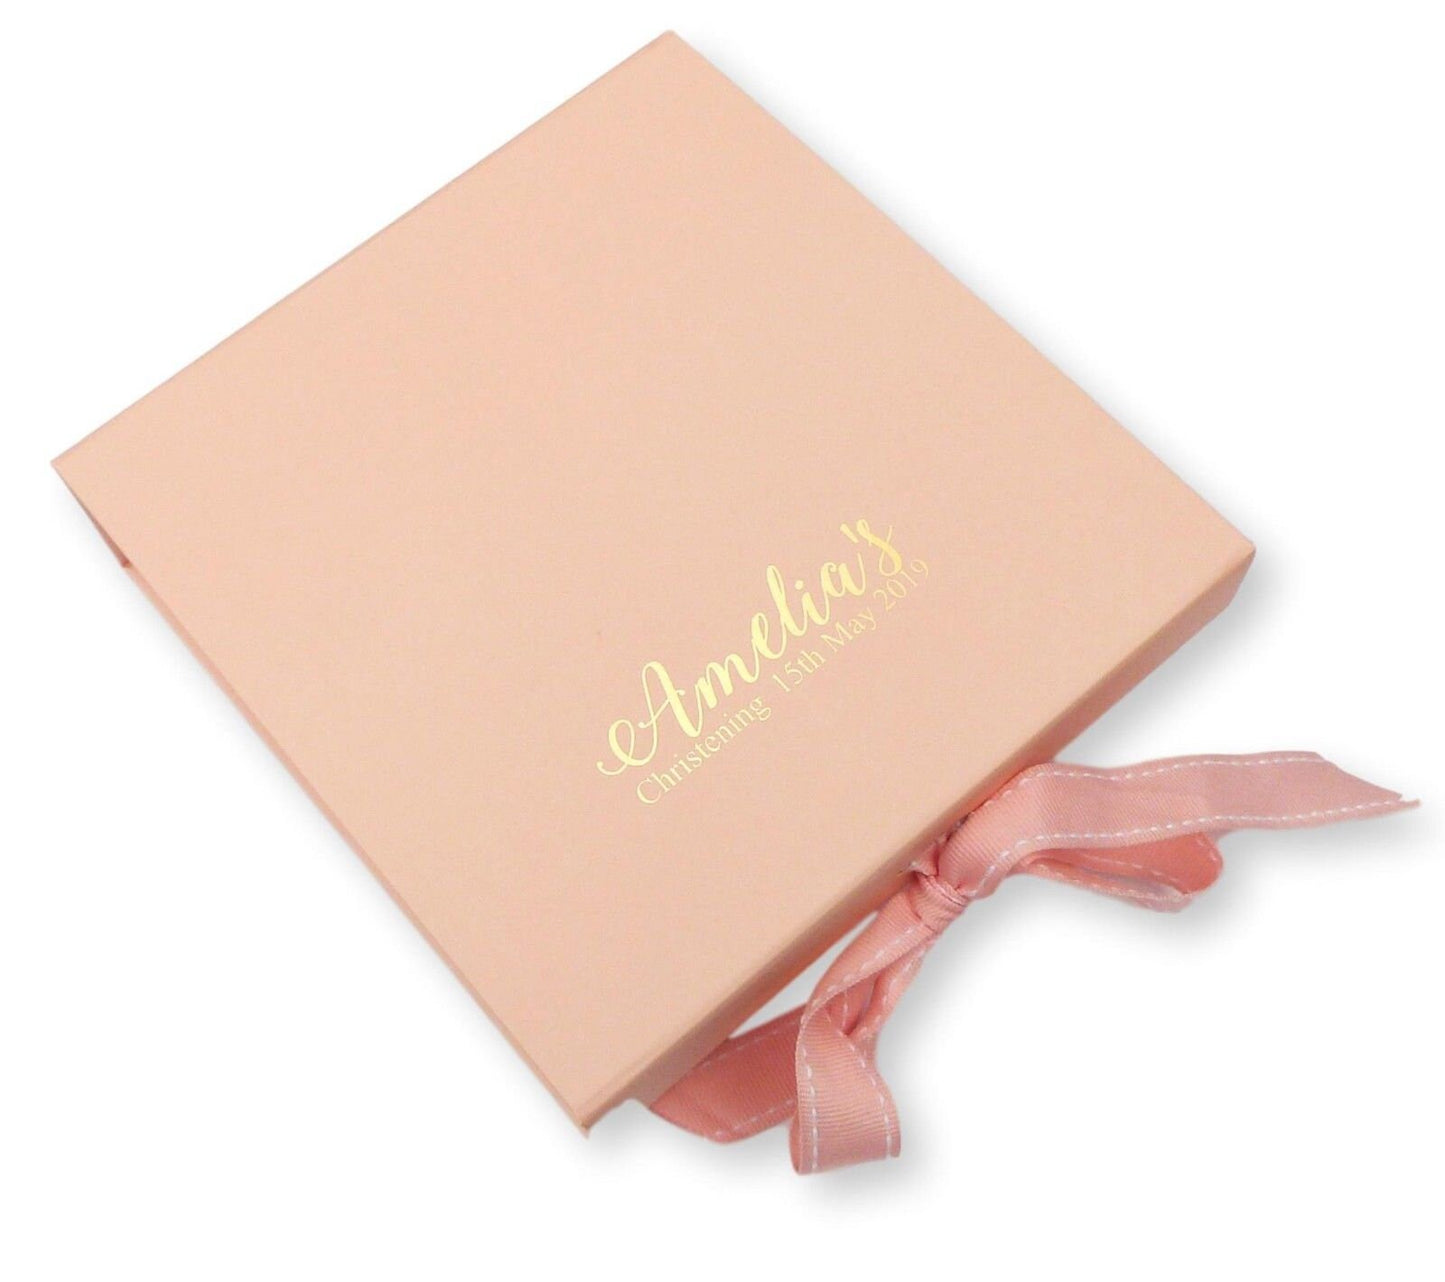 Personalised christening new baby gift box foil print gold / silver name date with ribbon tab